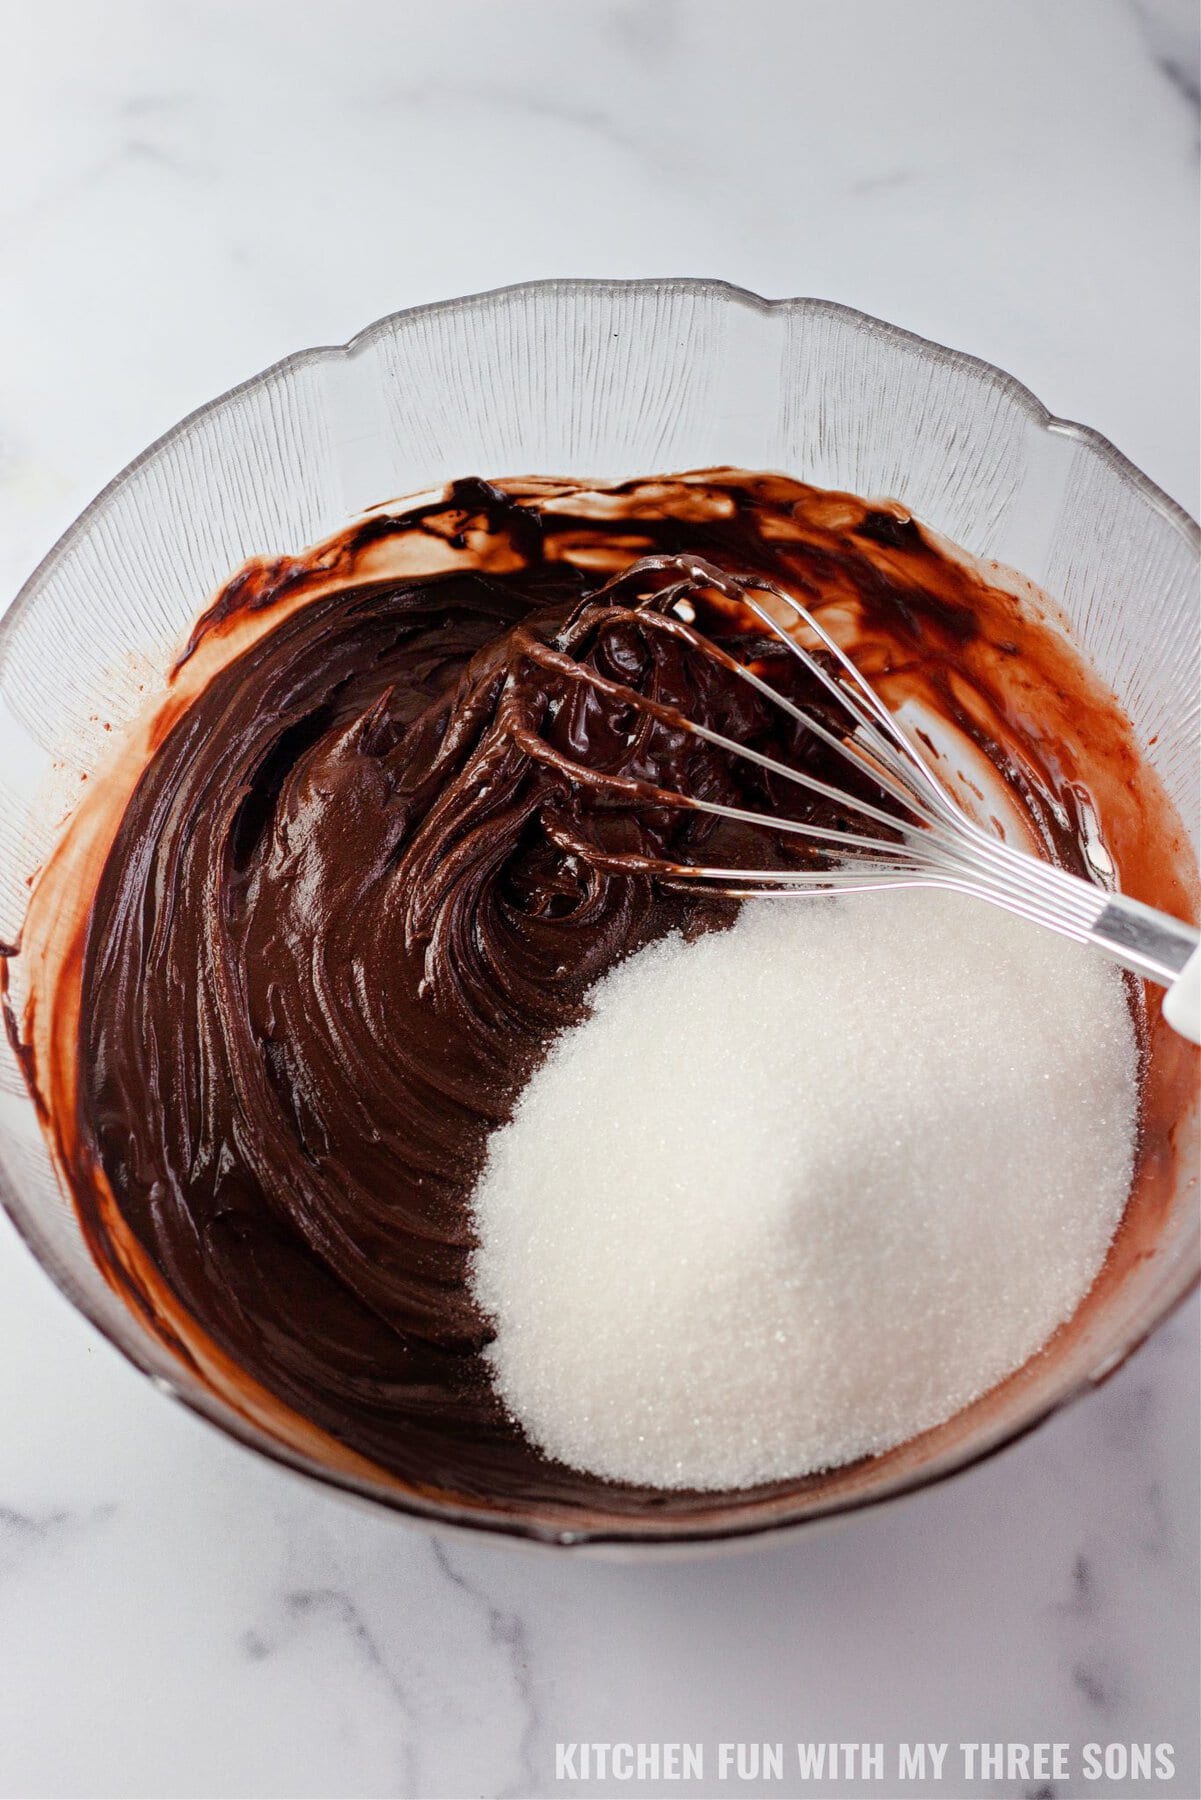 Sugar added to brownie batter in a glass bowl.